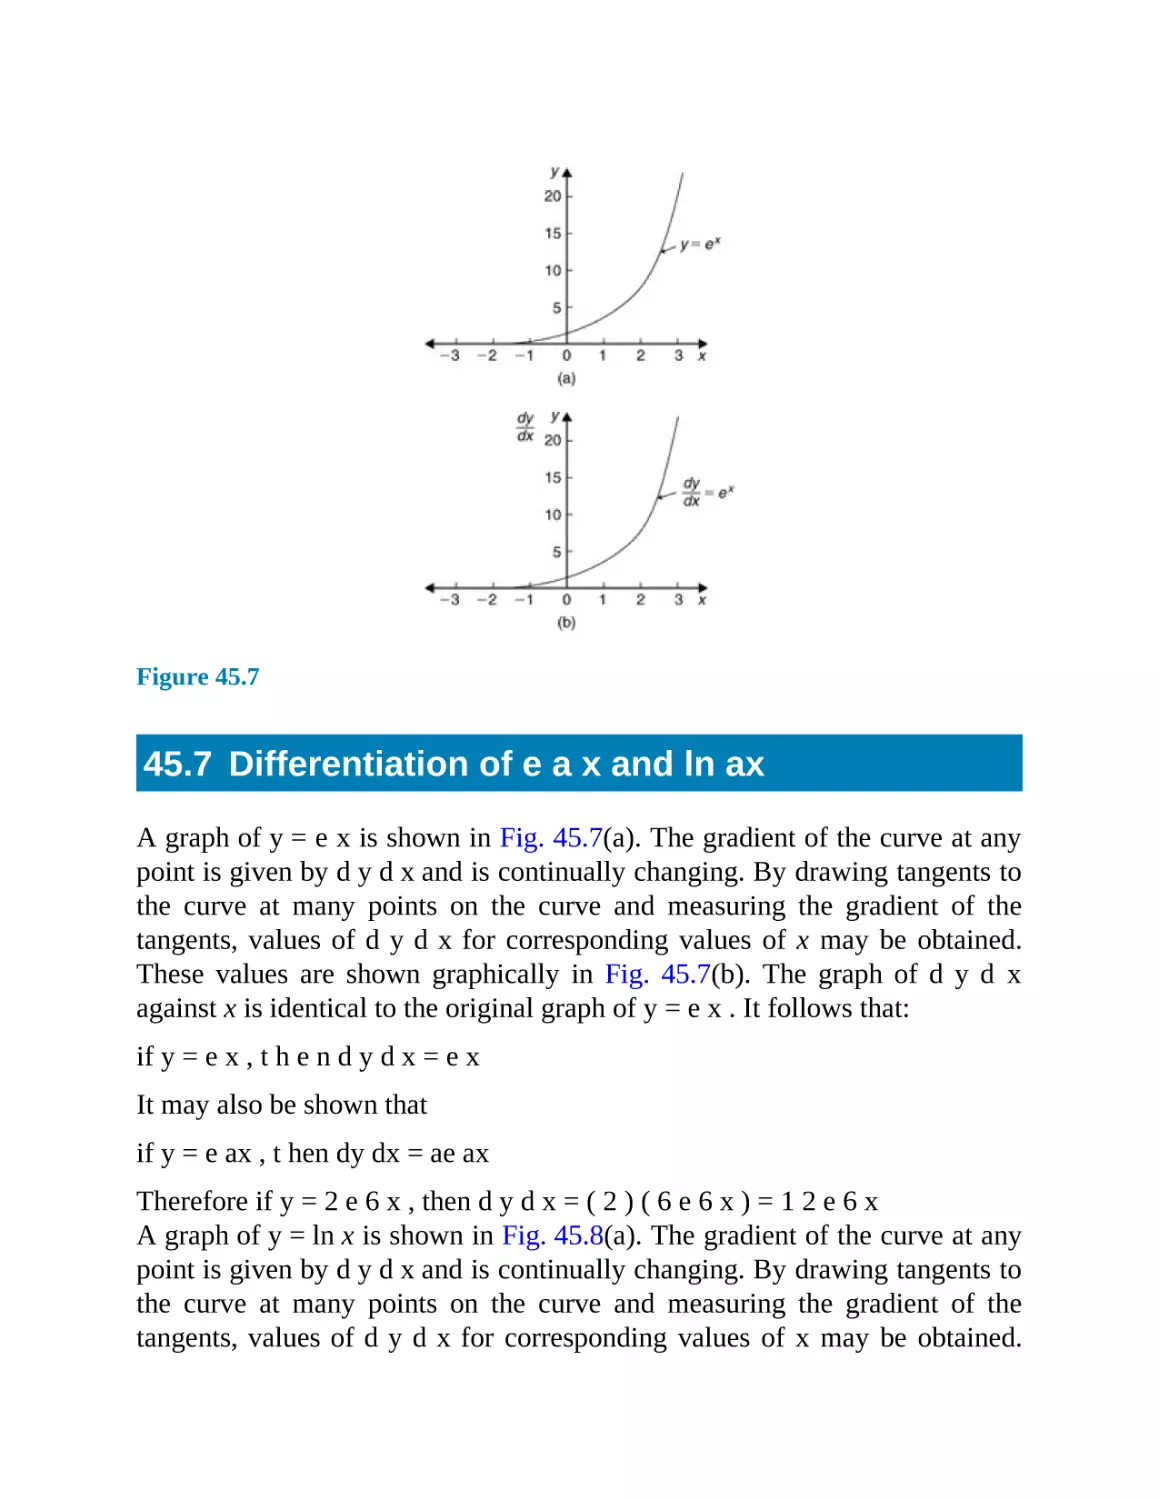 45.7 Differentiation of and ln ax